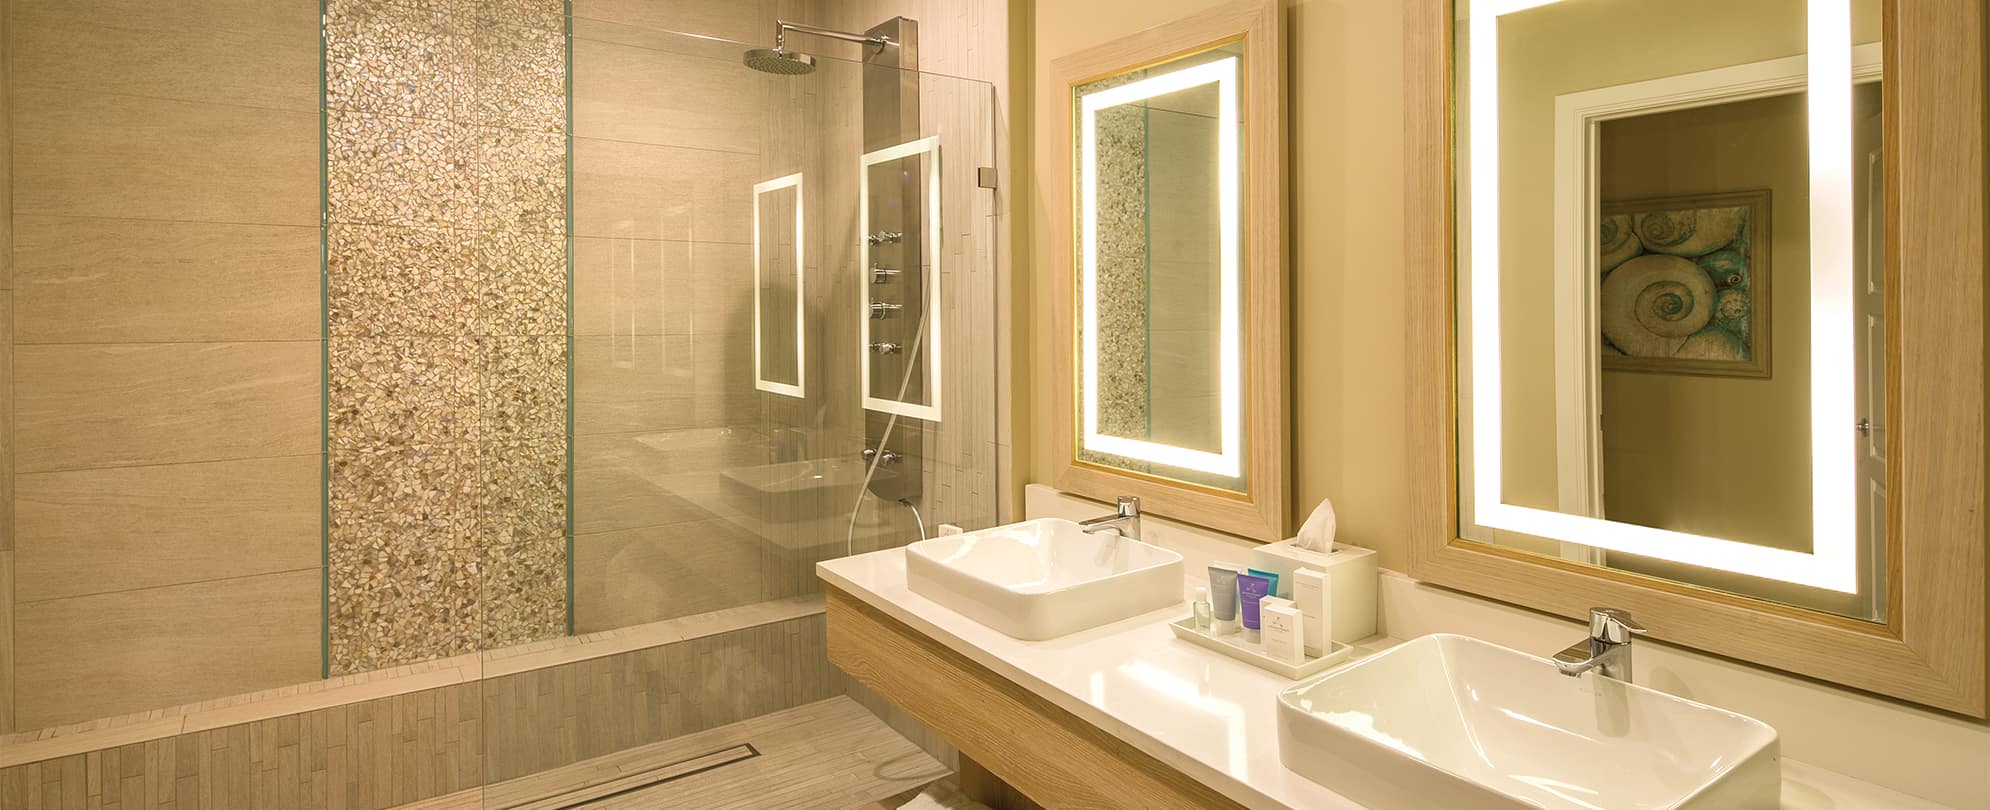 Double sinks and large glass shower in a Presidential Reserve suite at Margaritaville Vacation Club by Wyndham - St. Thomas.